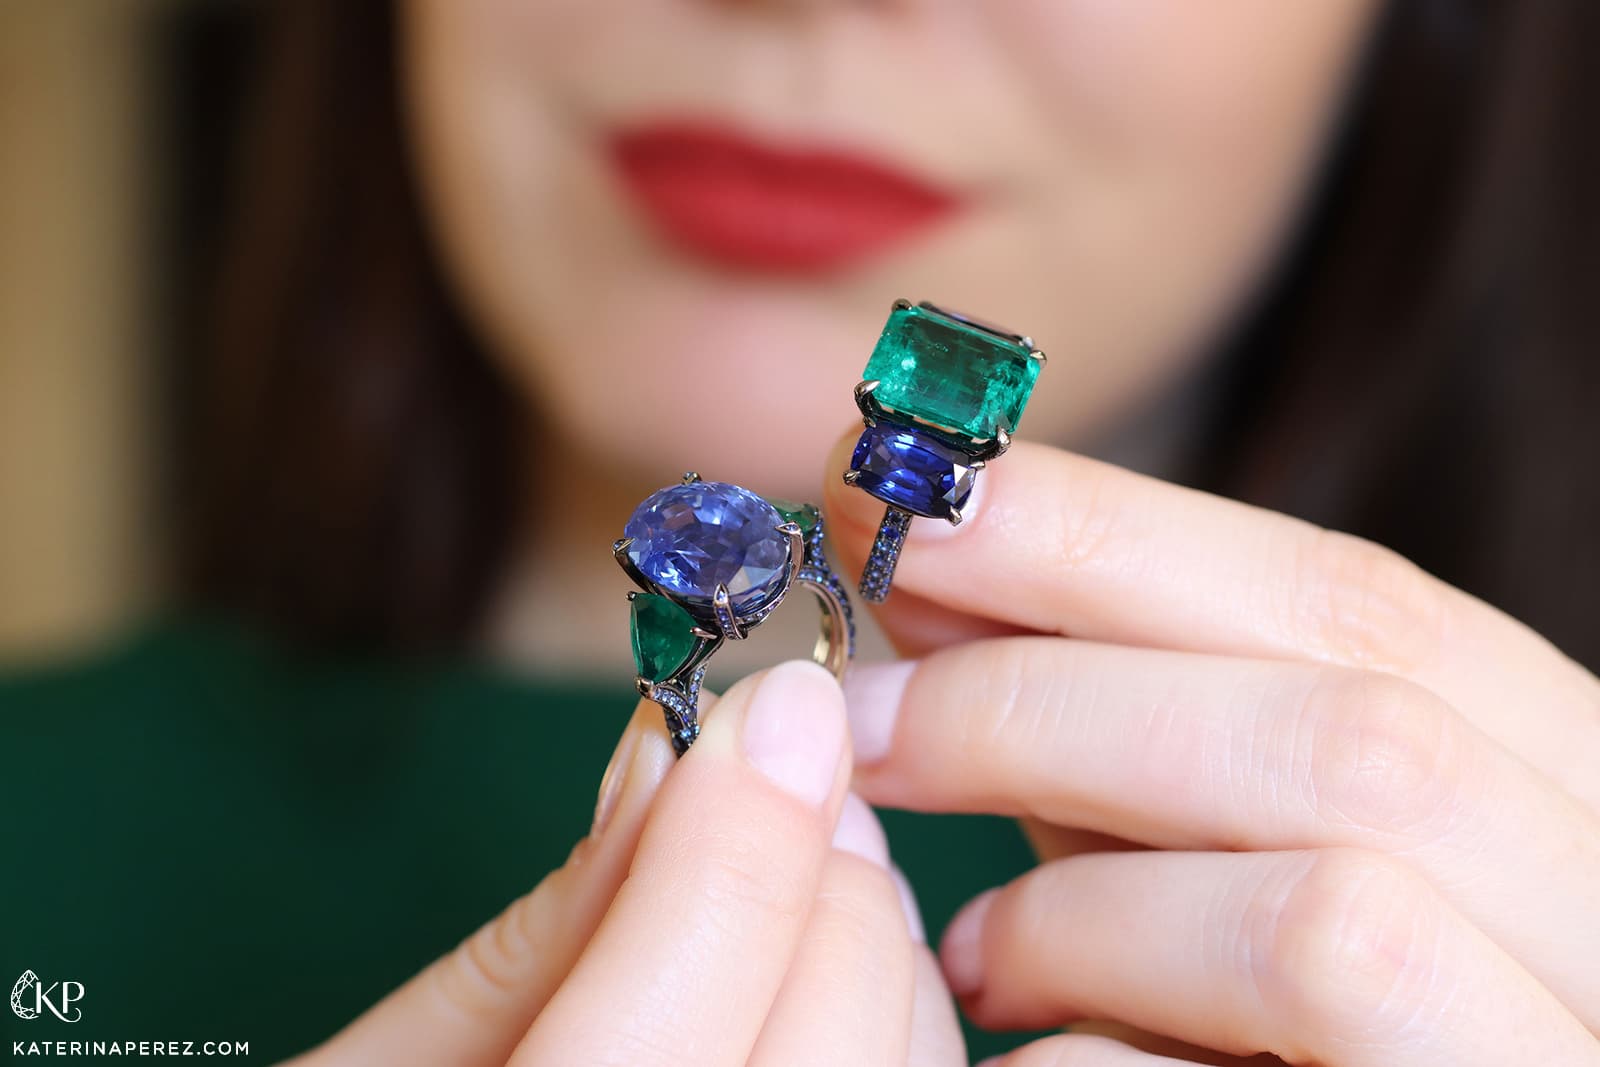 Katerina Perez holding two sapphire and emerald Bucherer Fine Jewellery Cocktail rings